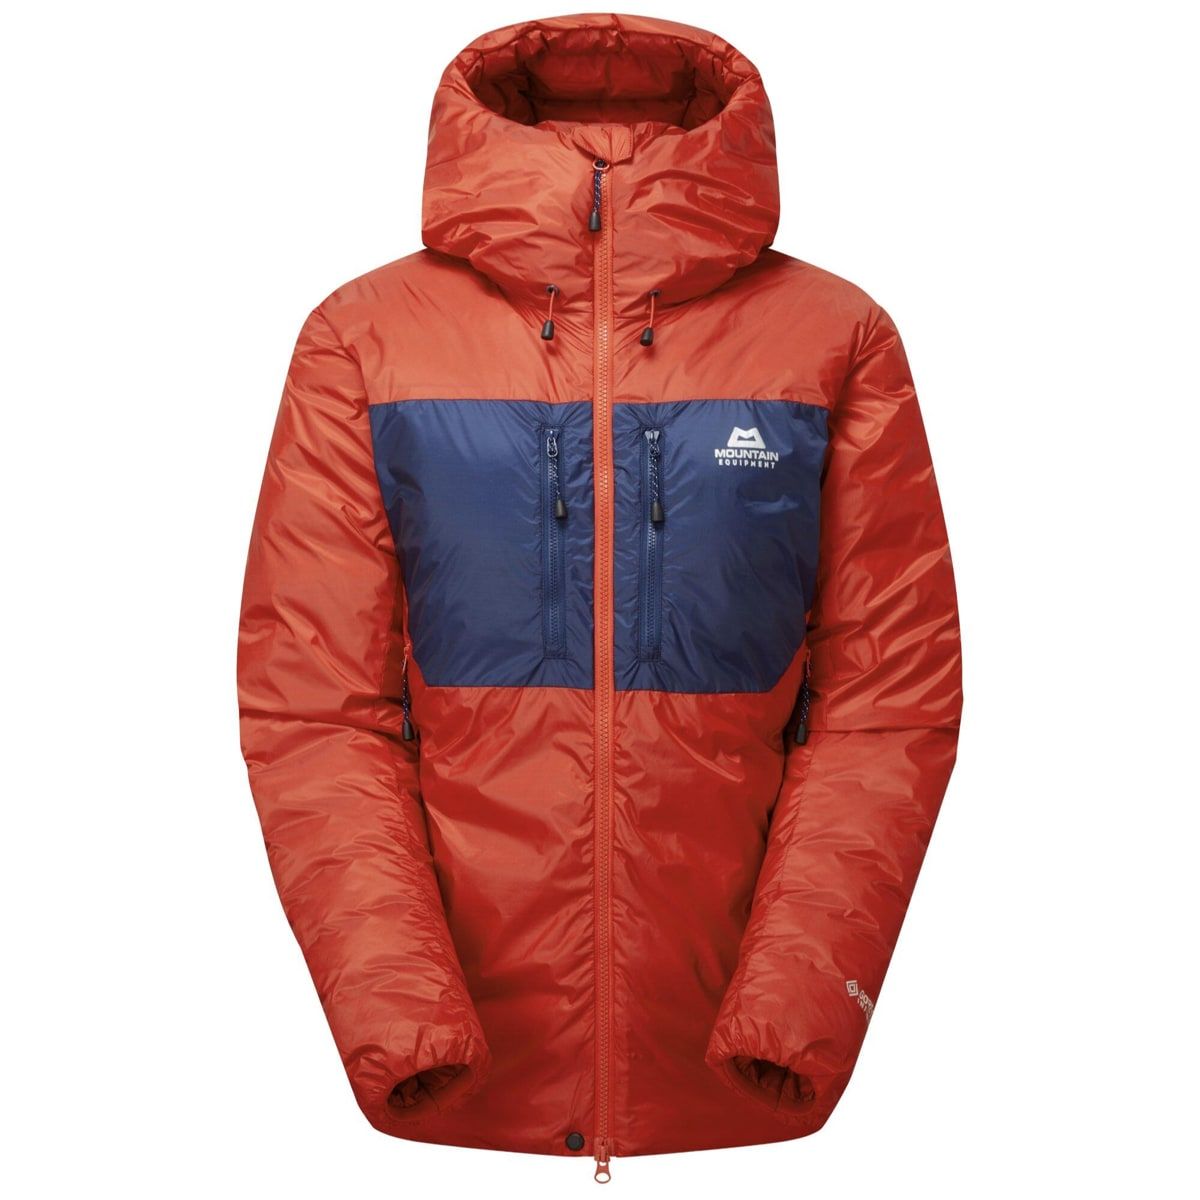 Mountain Equipment Kryos Wmns Jacket Chili Red/Medieval